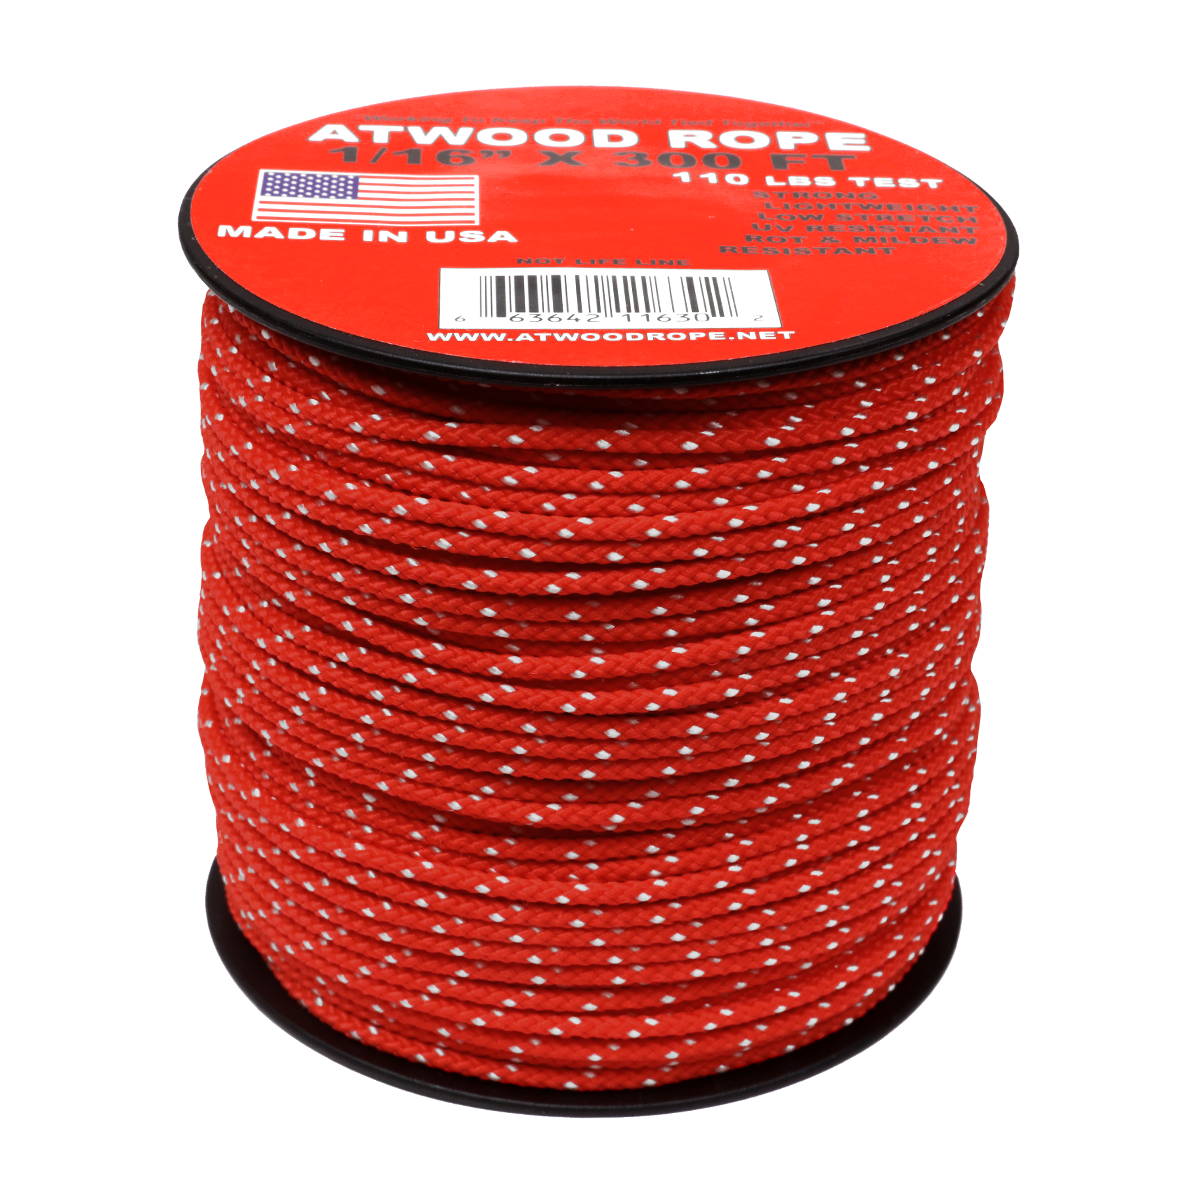  Atwood Rope MFG 1/16 Utility Cord 1.6mm x 100ft